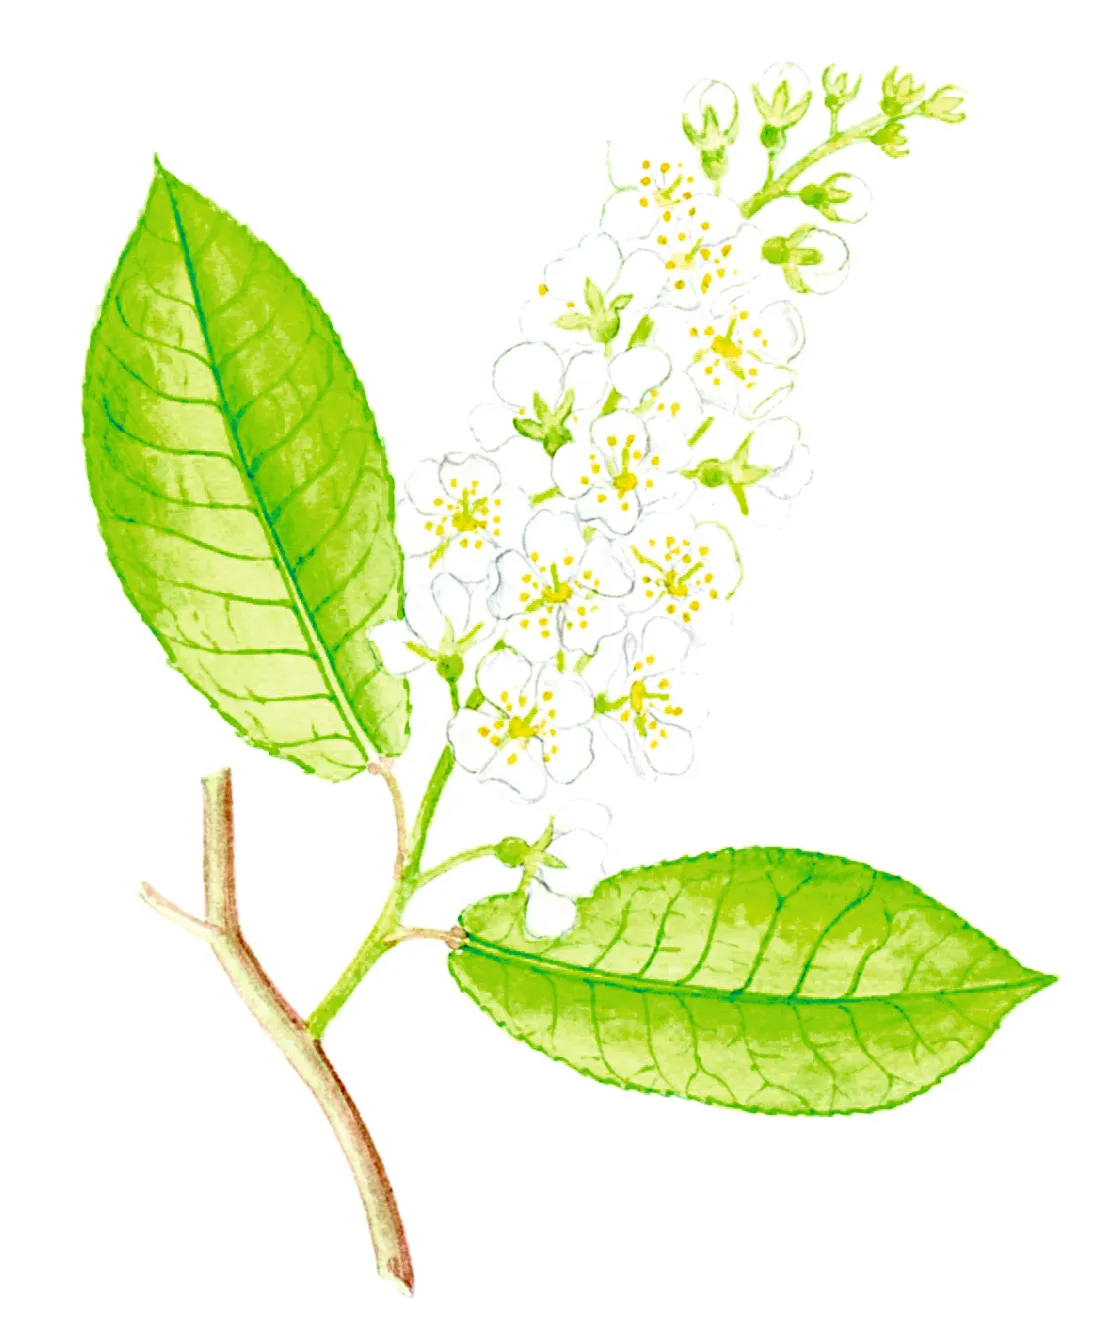 Illustration of bird cherry blossom and leaves.